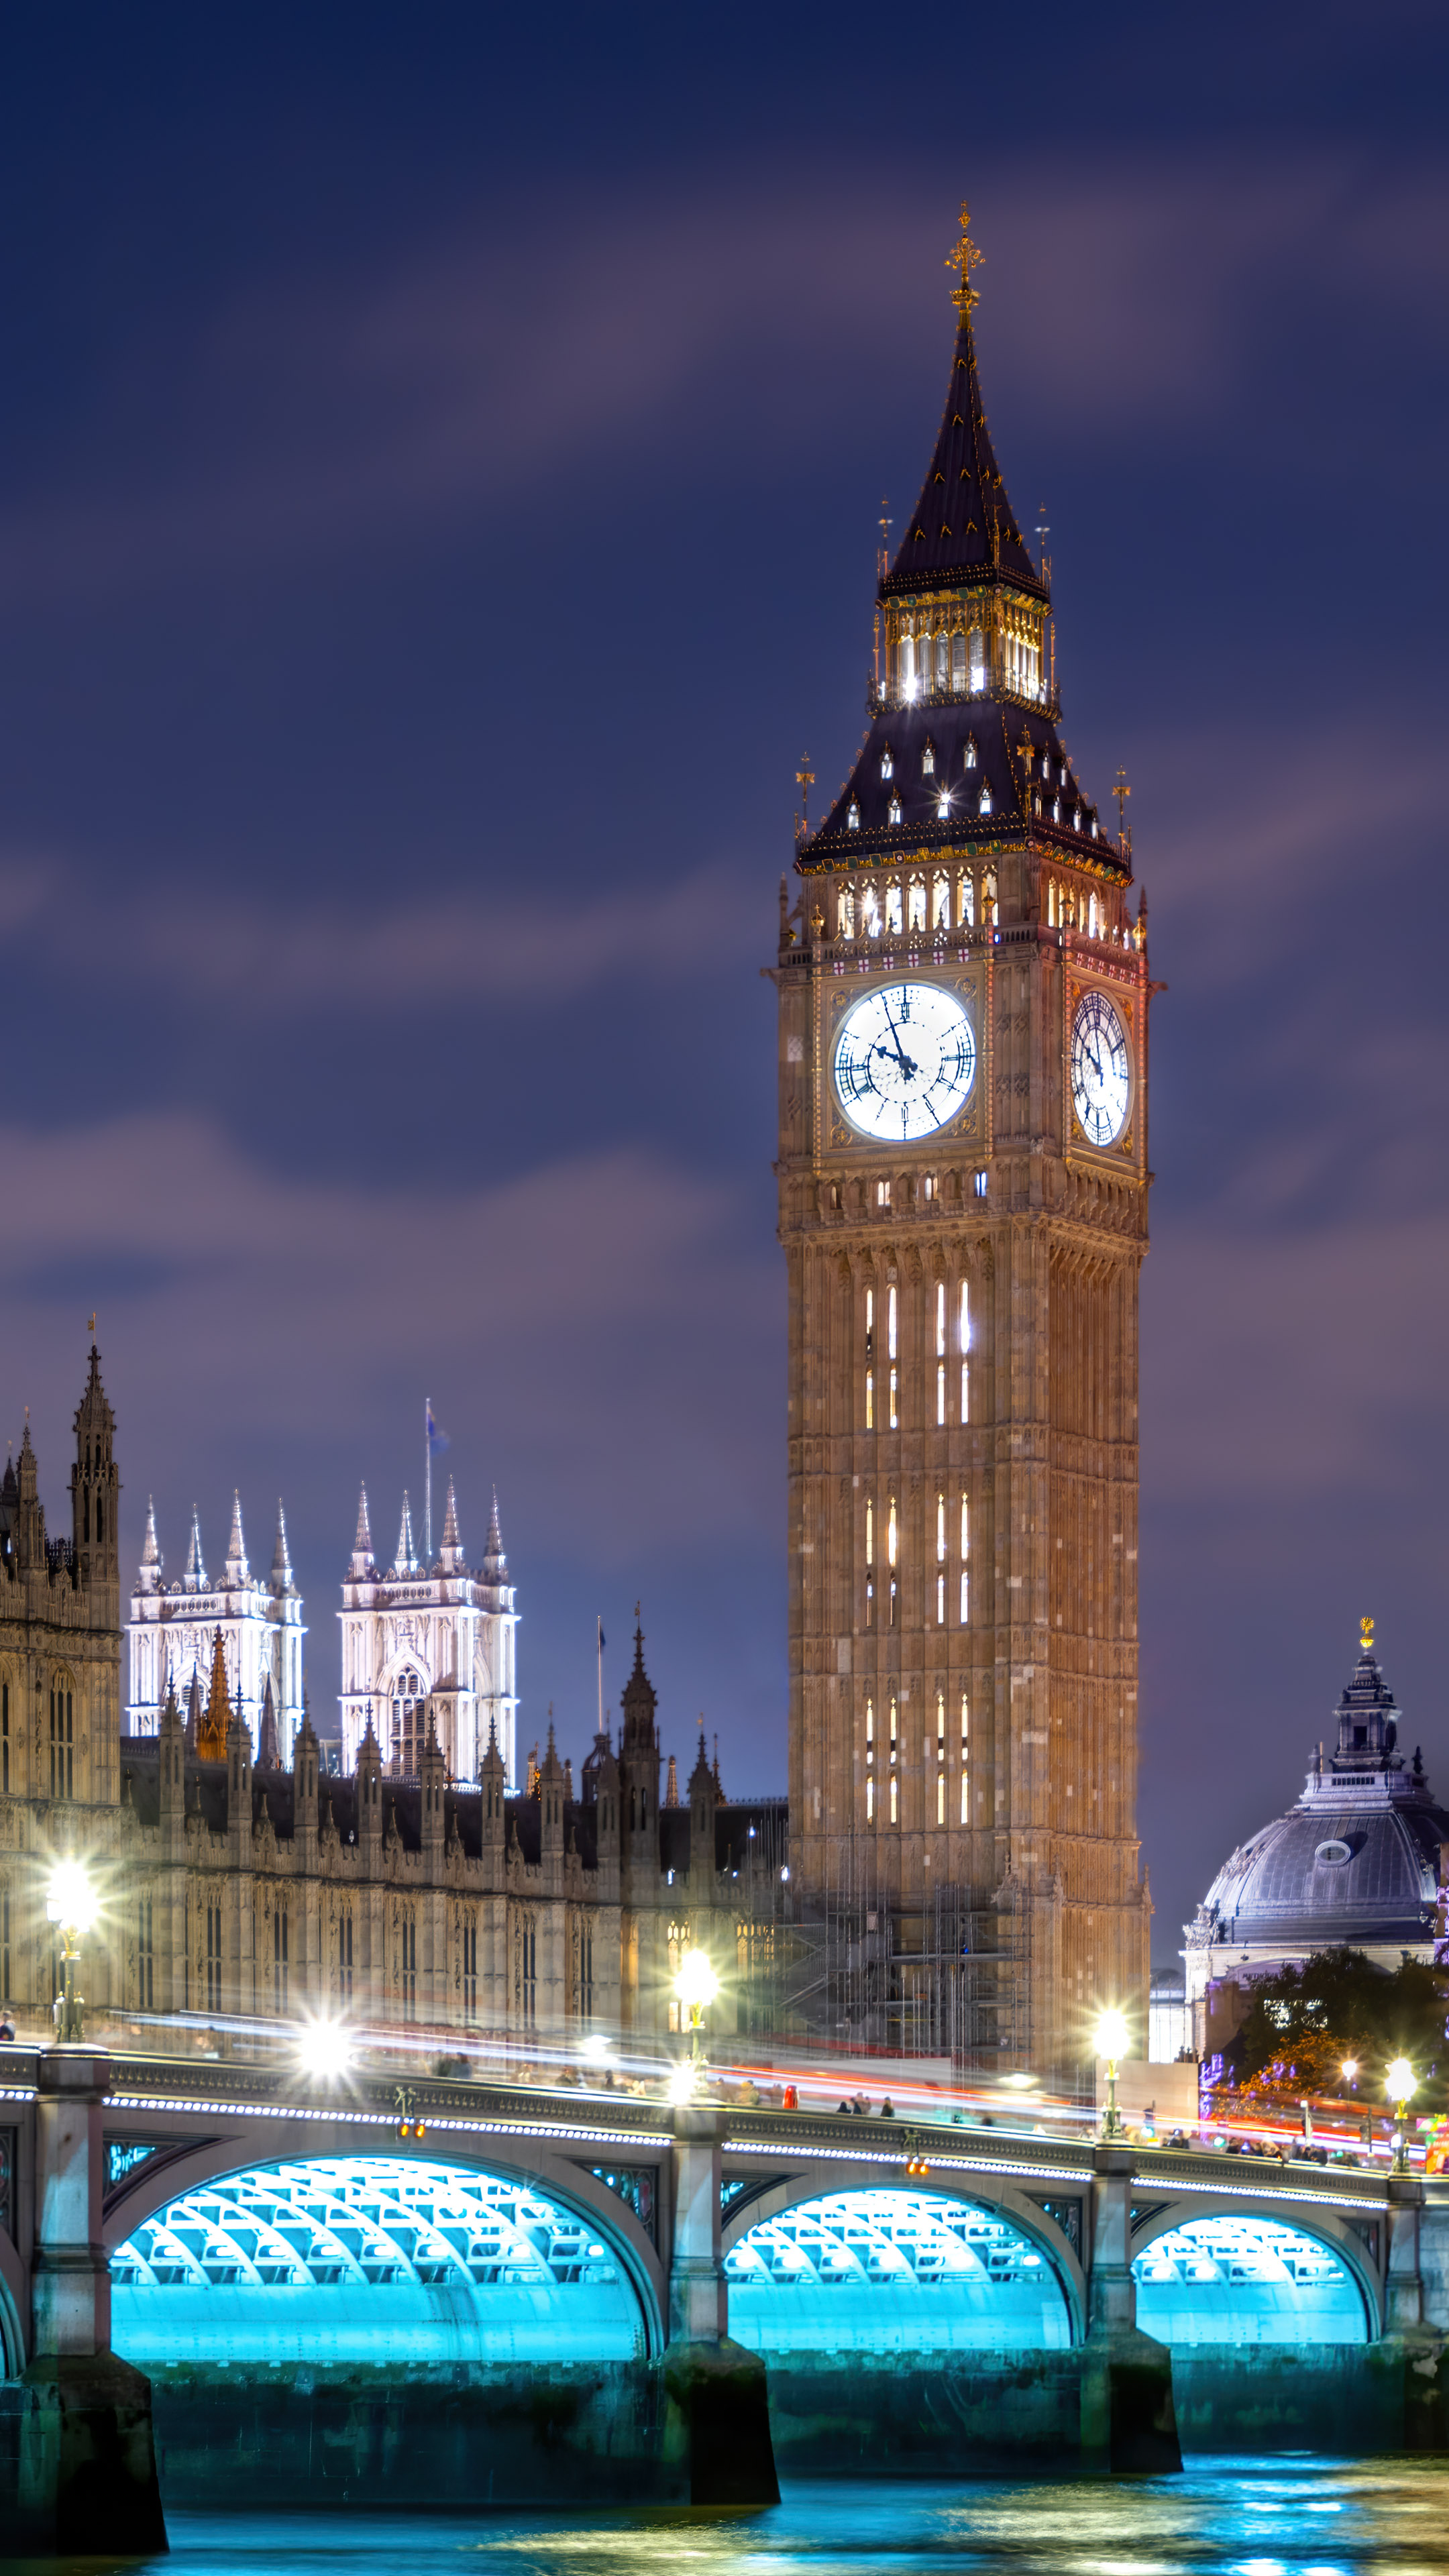 njoy the iconic view of London Big Ben and Westminster Bridge at night with this mobile wallpaper.